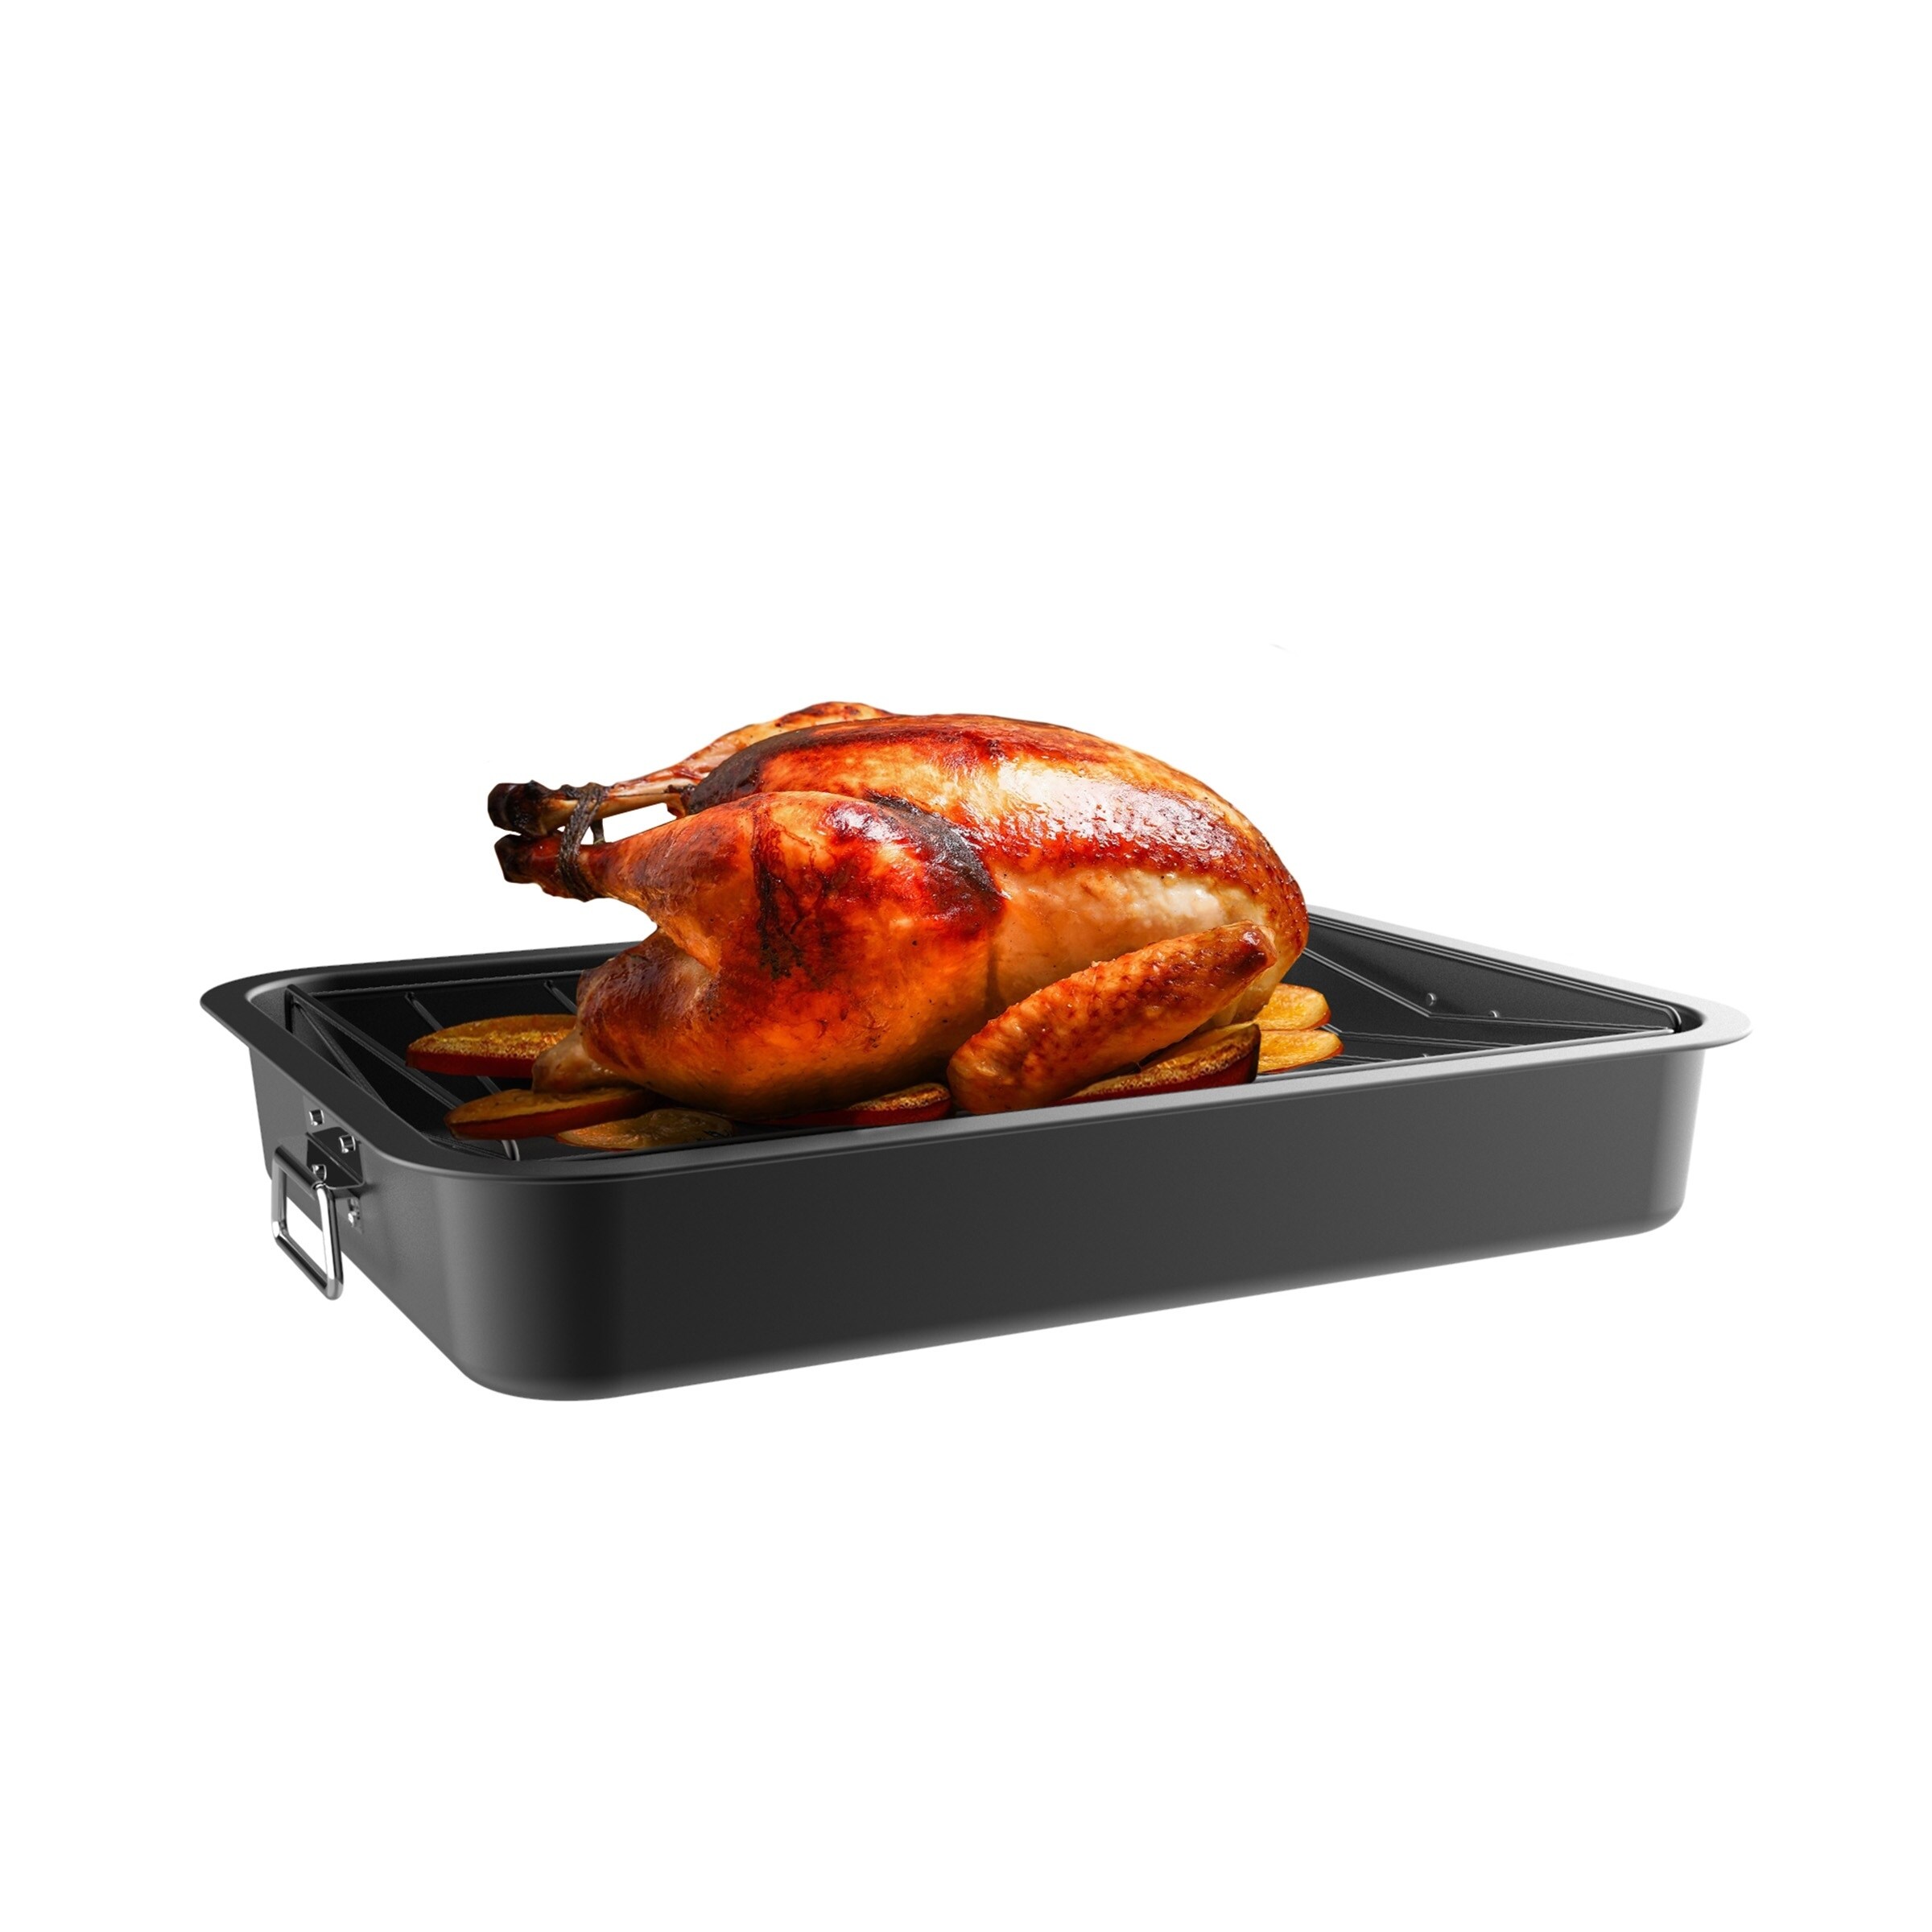 https://ak1.ostkcdn.com/images/products/26050121/Roasting-Pan-with-Angled-Rack-Nonstick-Oven-Roaster-by-Classic-Cuisine-d1f973a8-c4ab-46fd-8808-46e8783febce.jpg